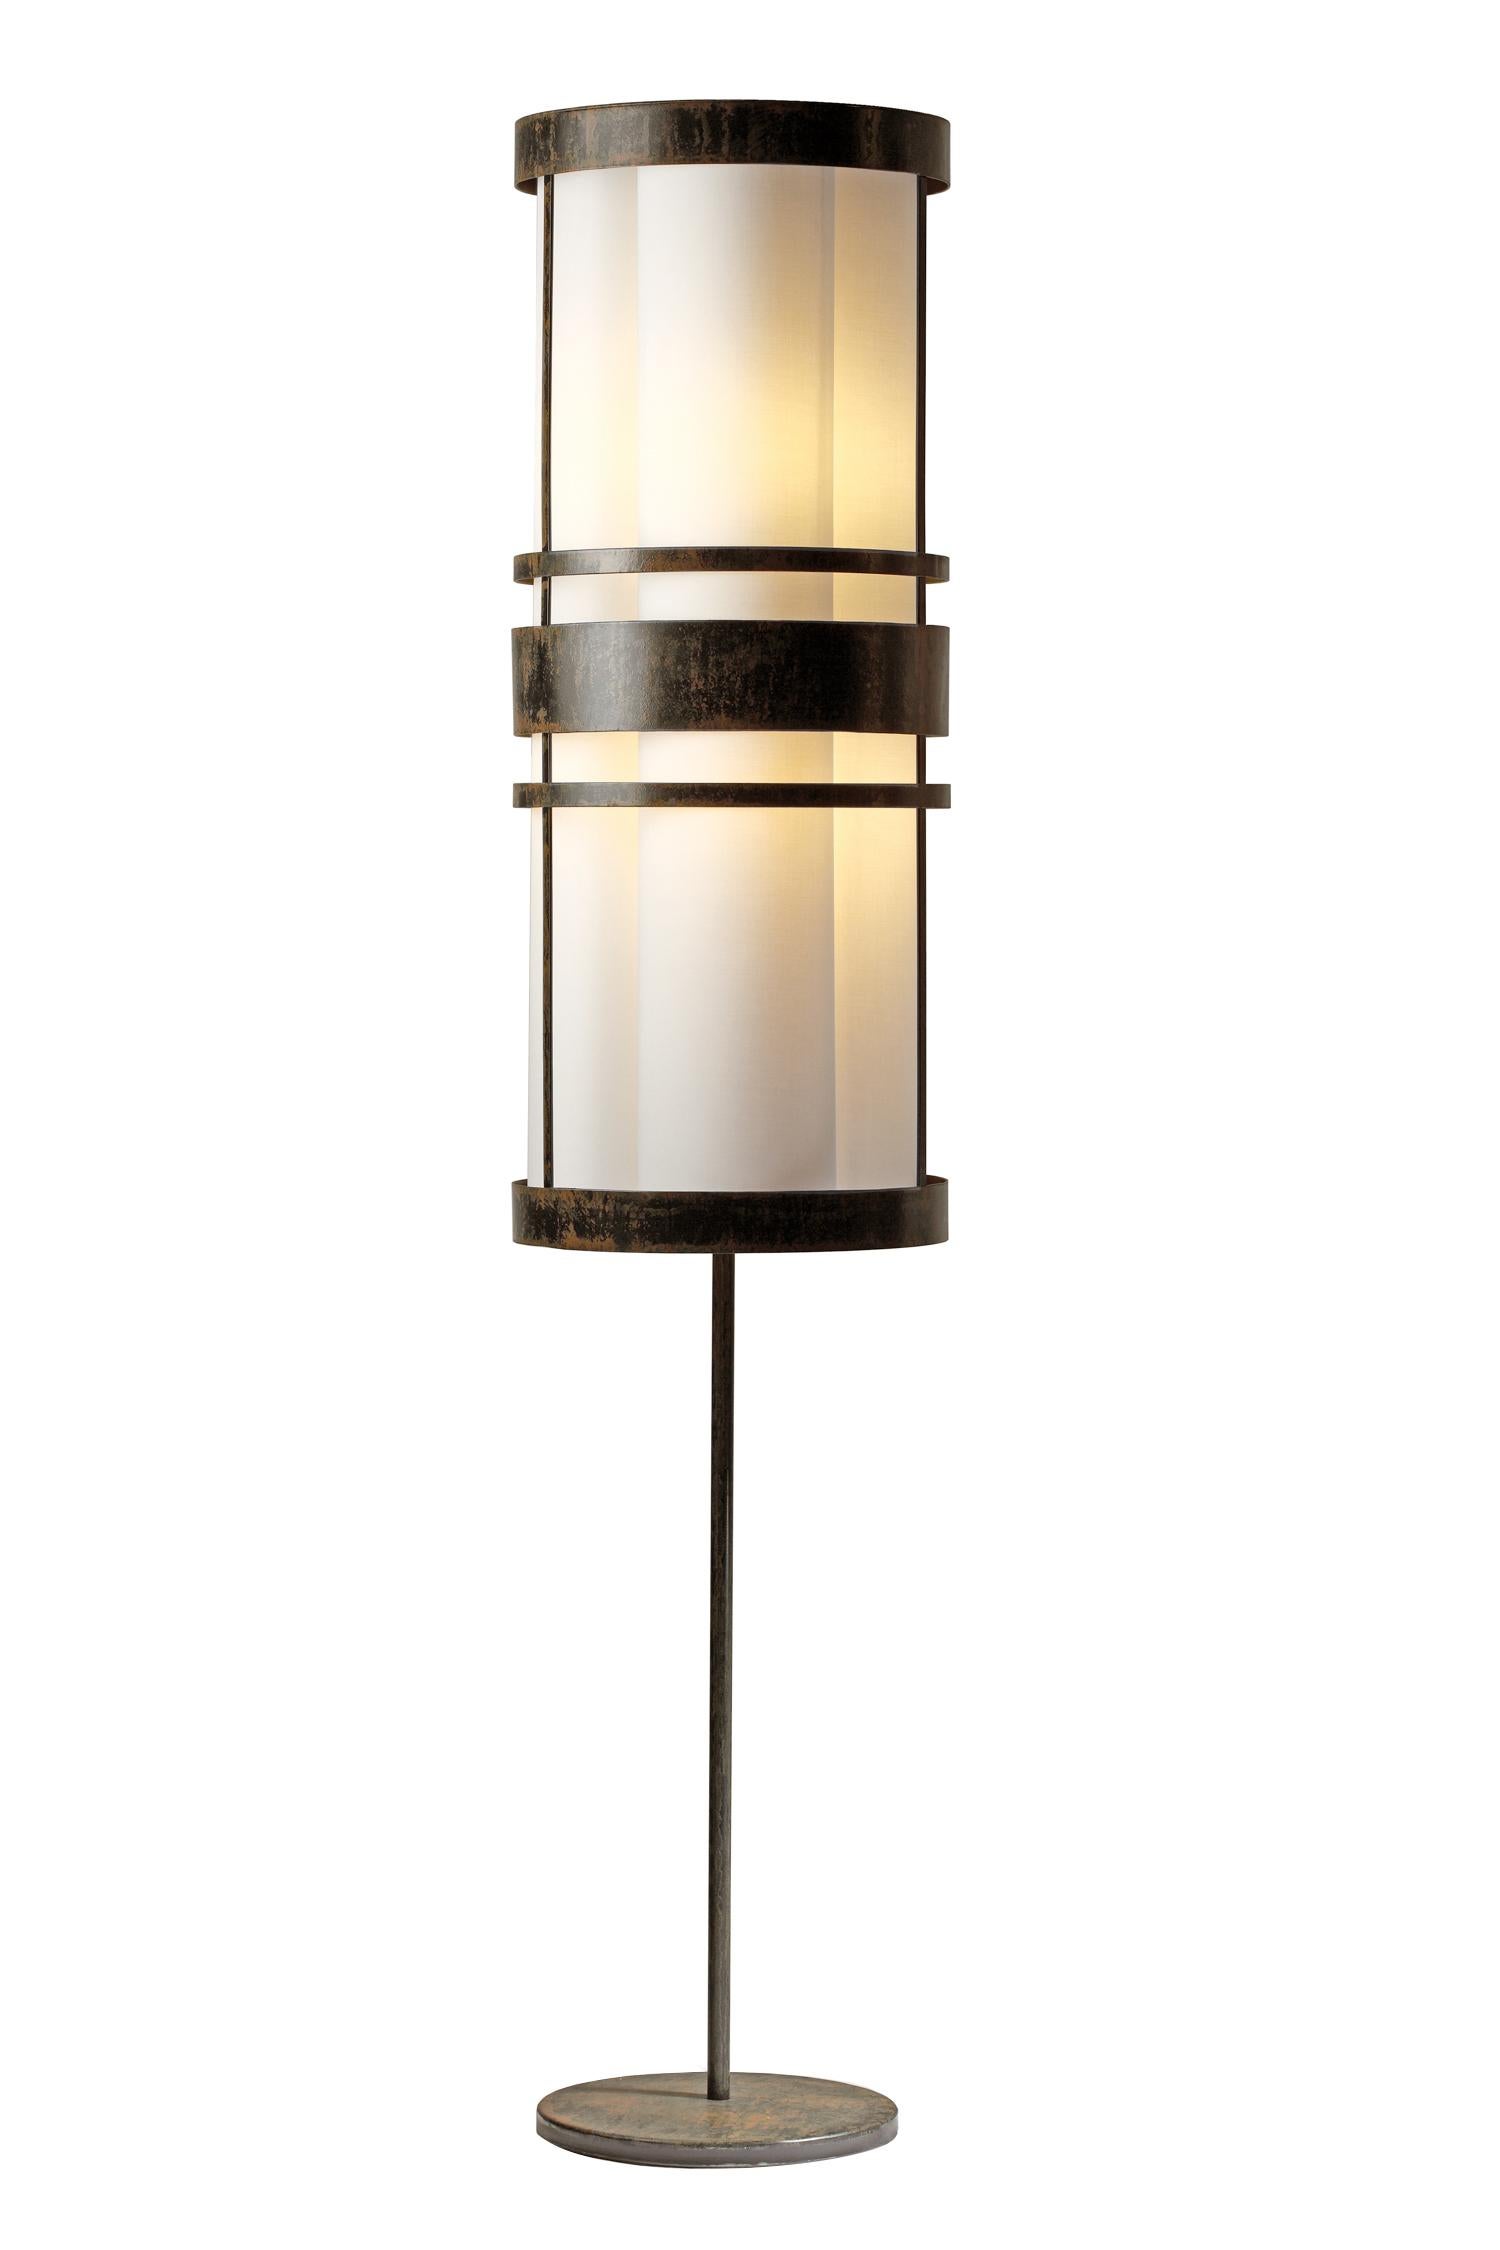 Cotton Contemporary Art Deco Inspired Circus Floor Lamp Black Powder Coated For Sale